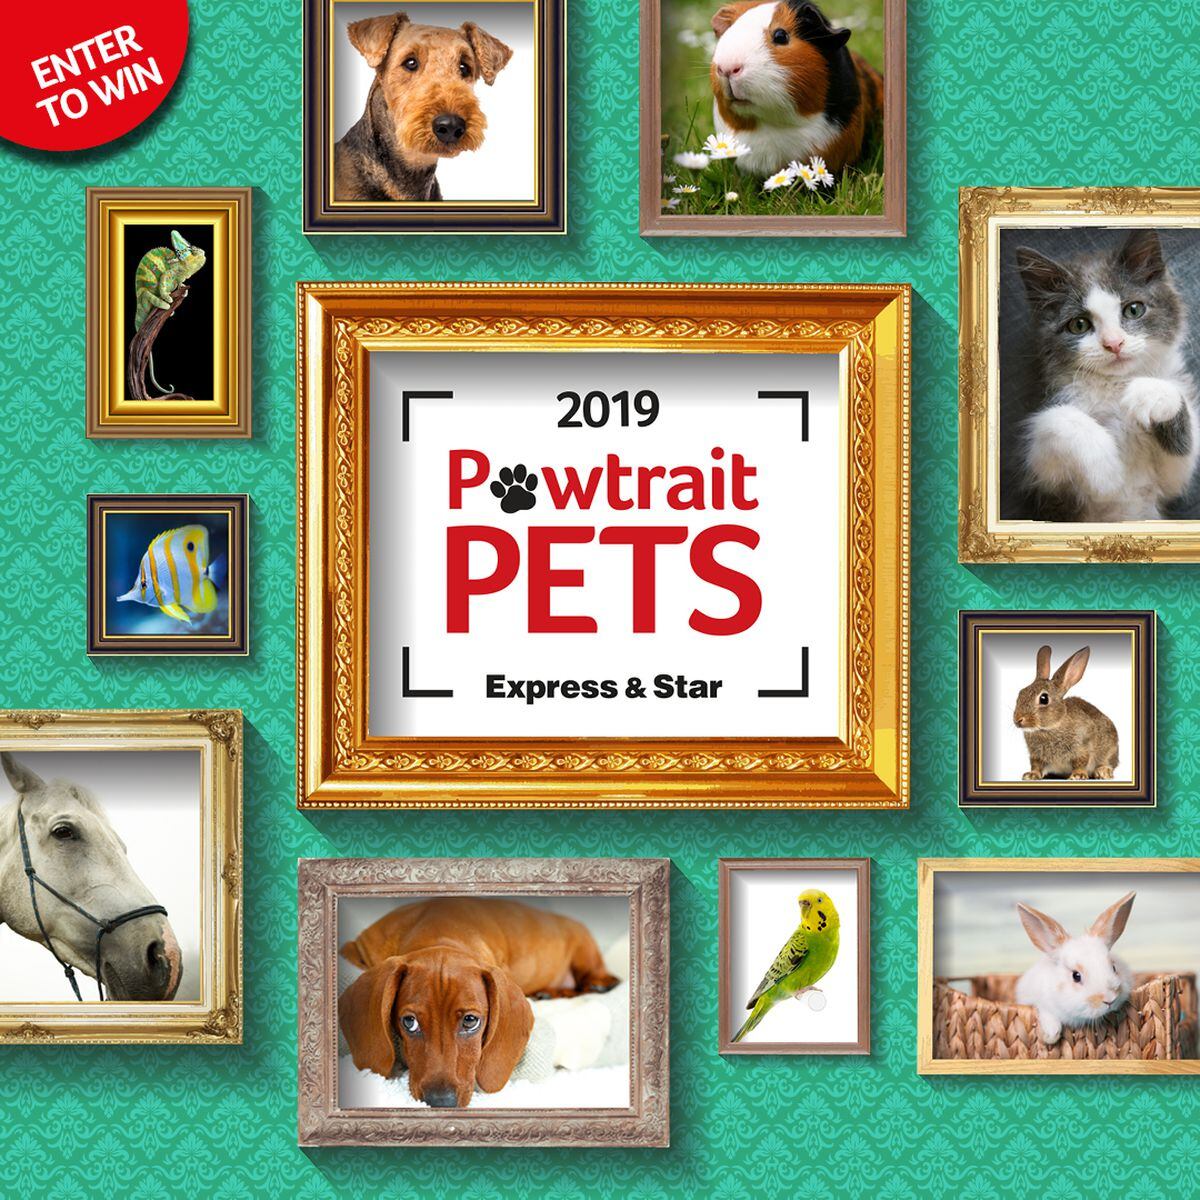 We want to see your Pet Pawtraits!